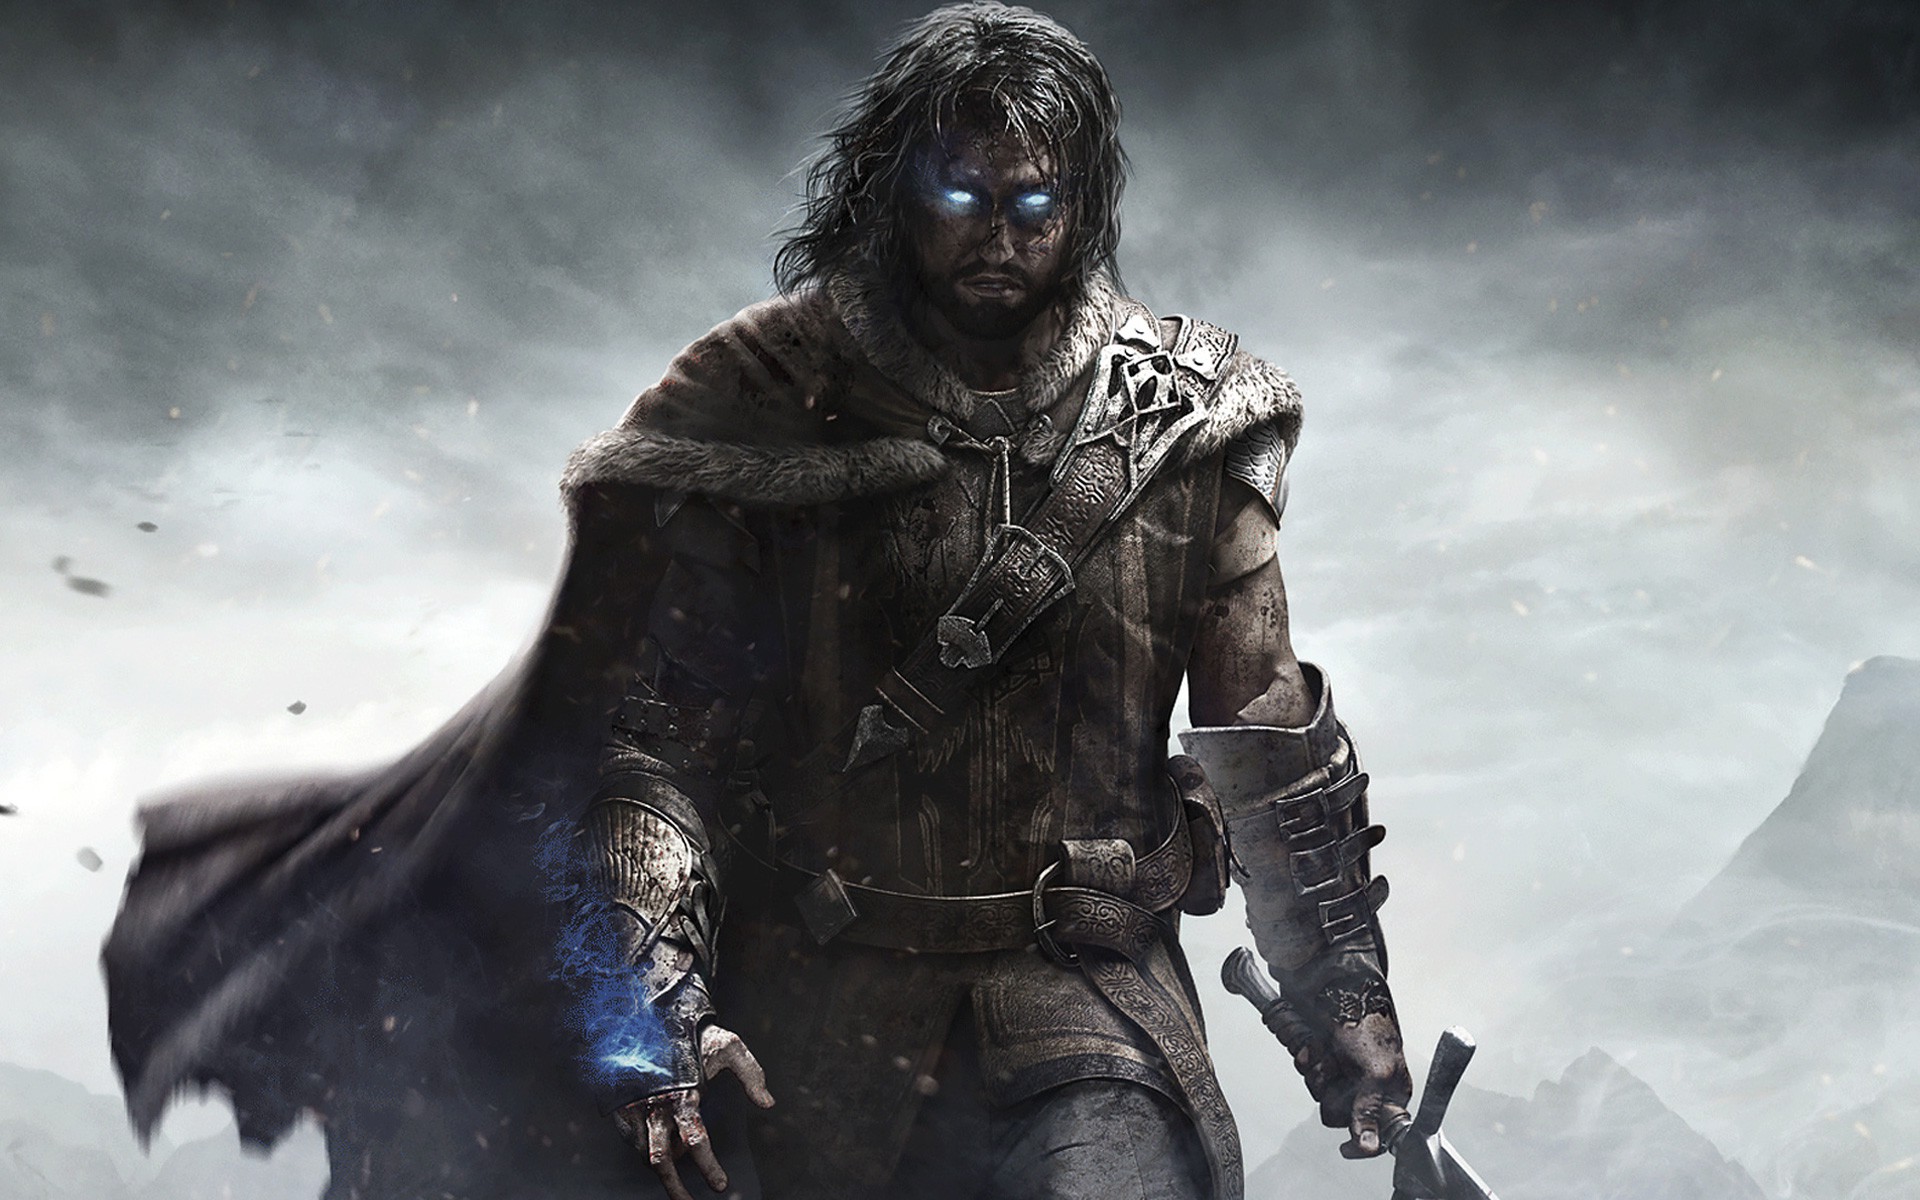 iphone x shadow of mordor backgrounds